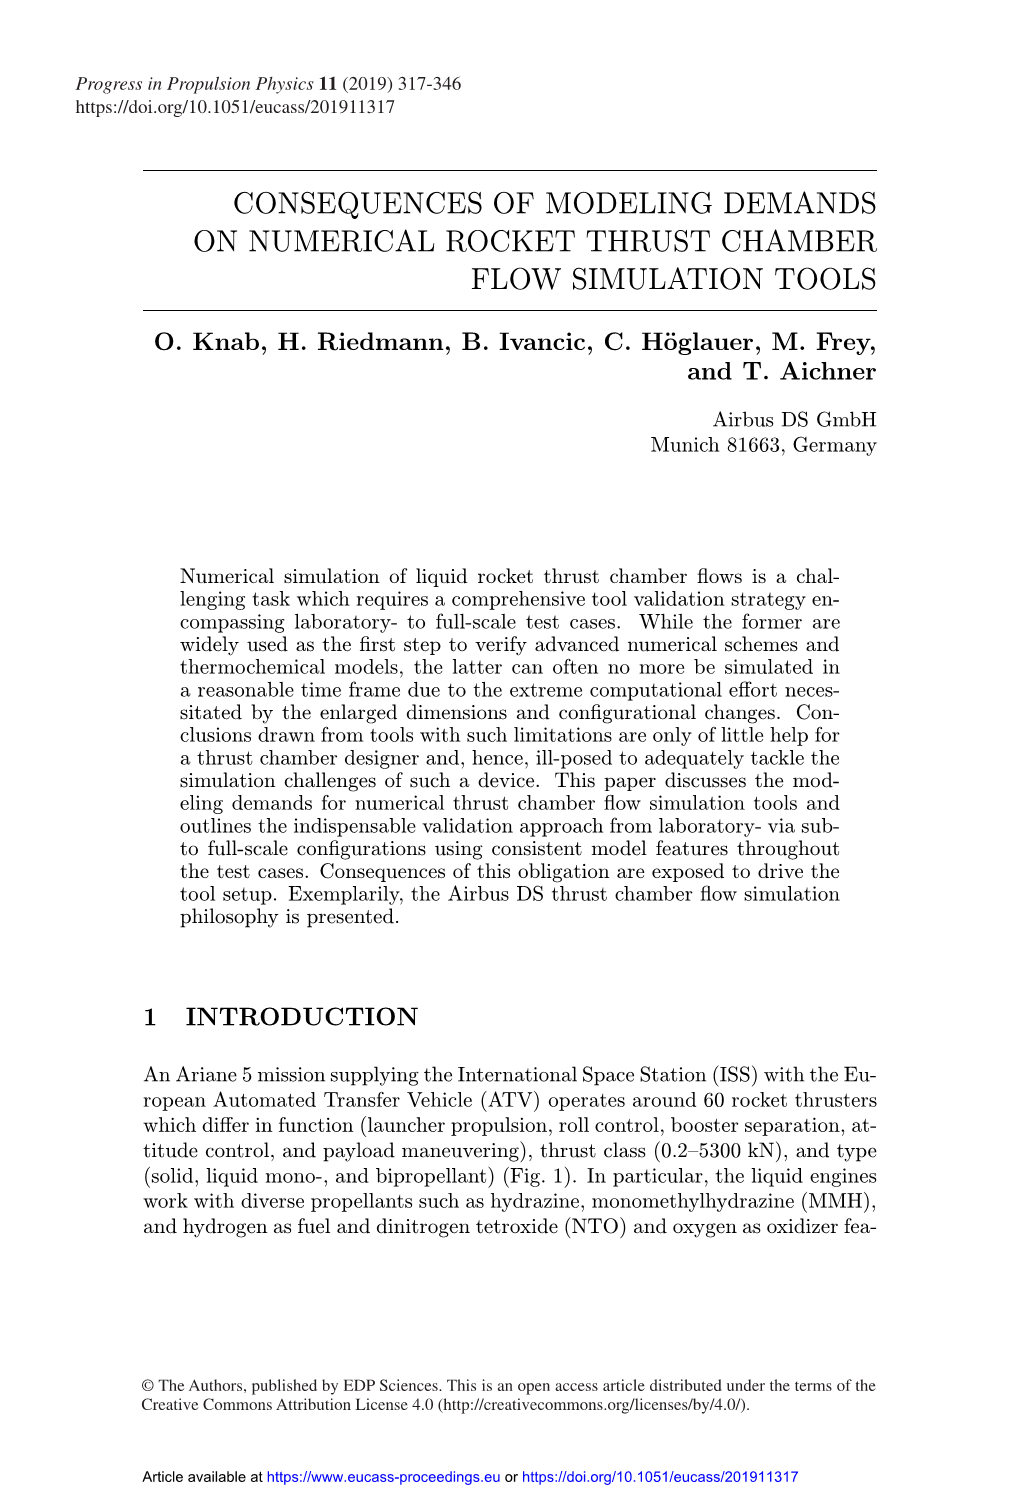 Consequences of Modeling Demands on Numerical Rocket Thrust Chamber Flow Simulation Tools